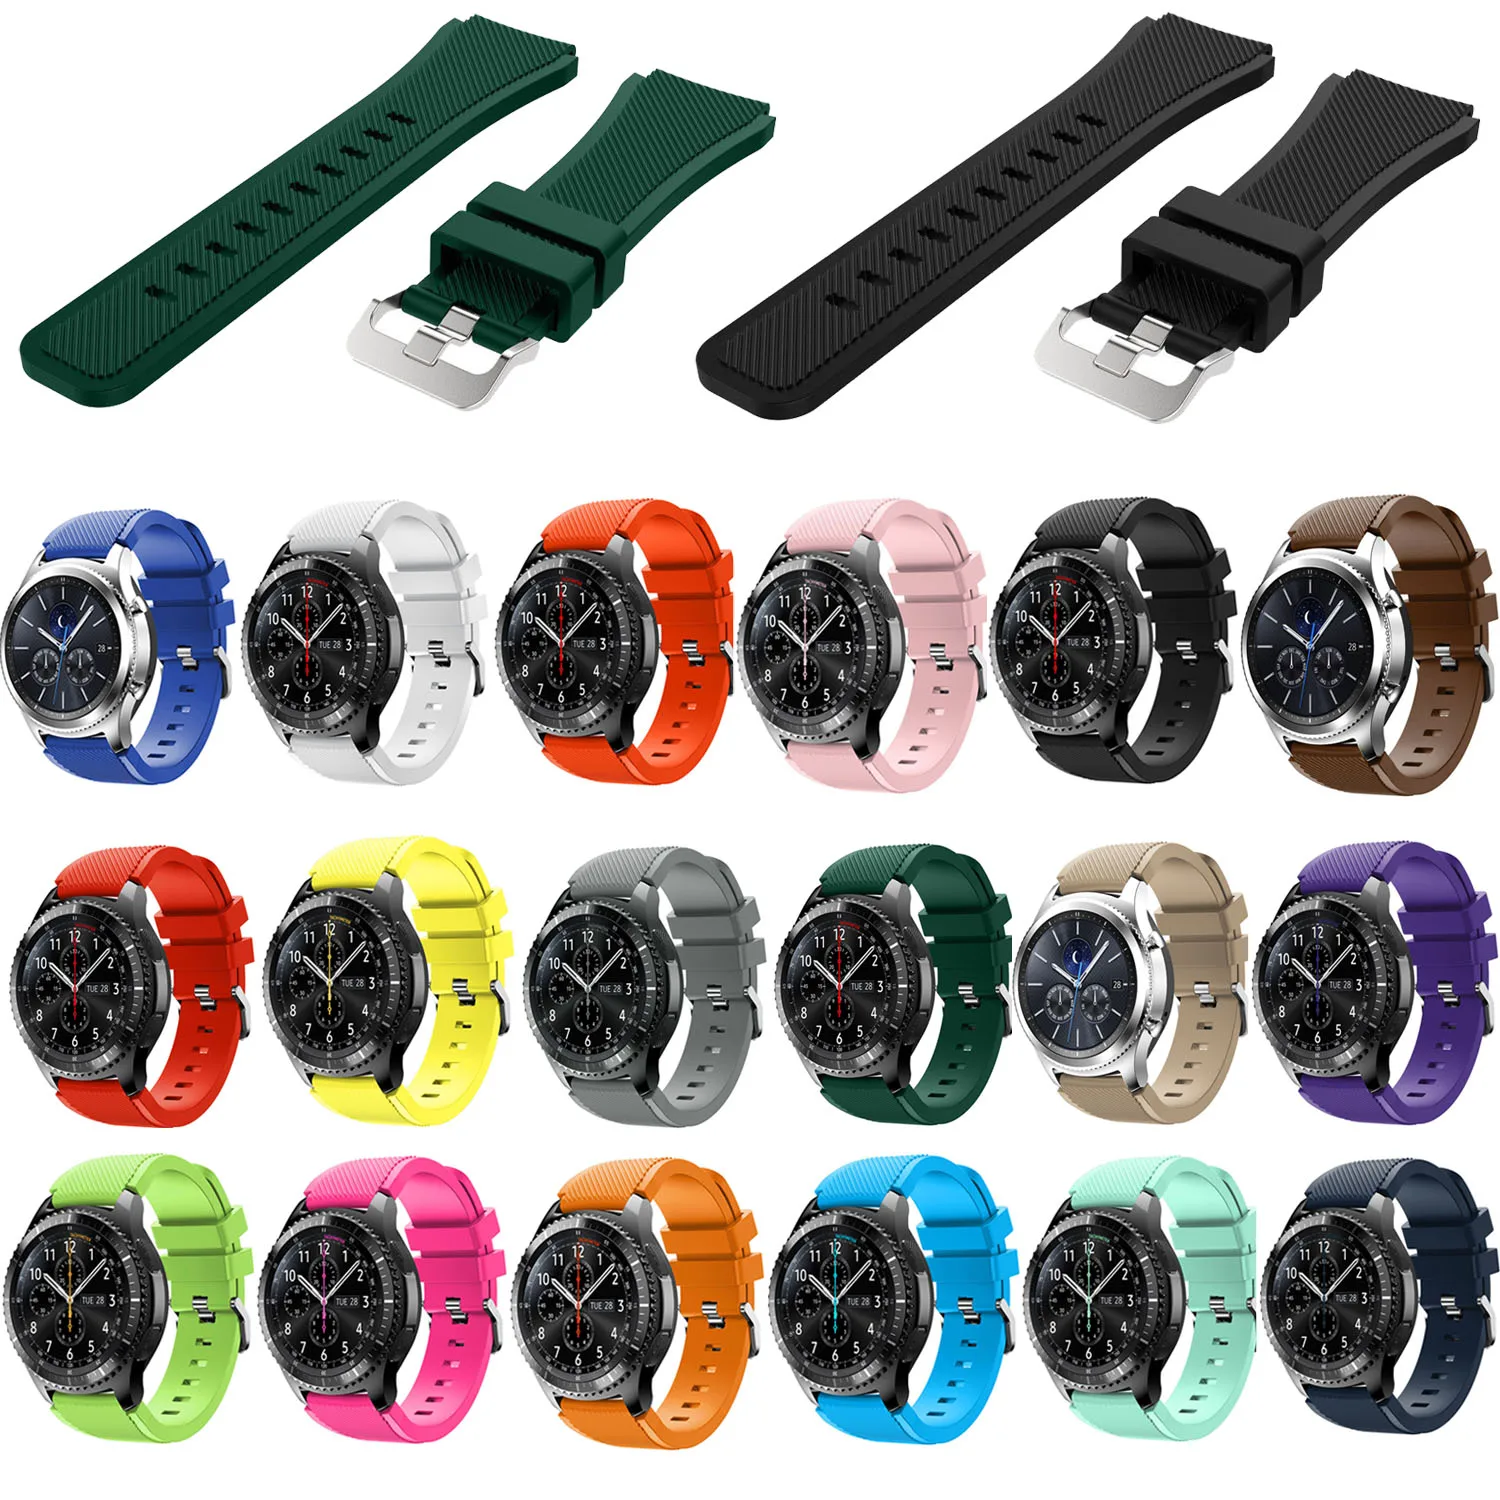 Frontier New Silicone Wrist Band Bracelet Strap For Samsung Gear S3 Classic 